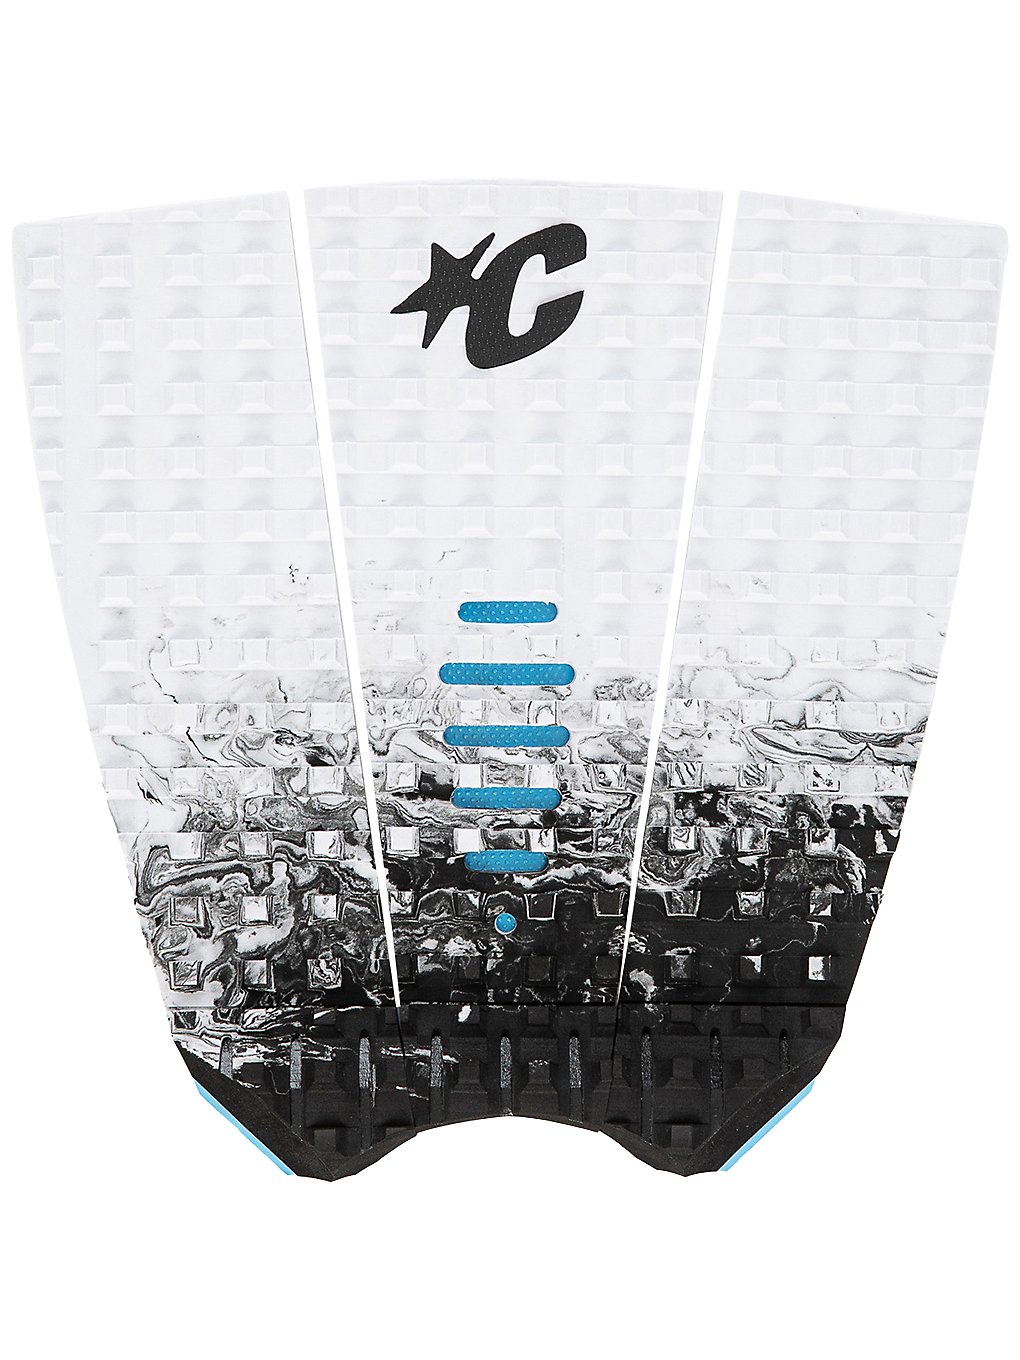 Creatures of Leisure Mick Fanning Traction Pad hvit